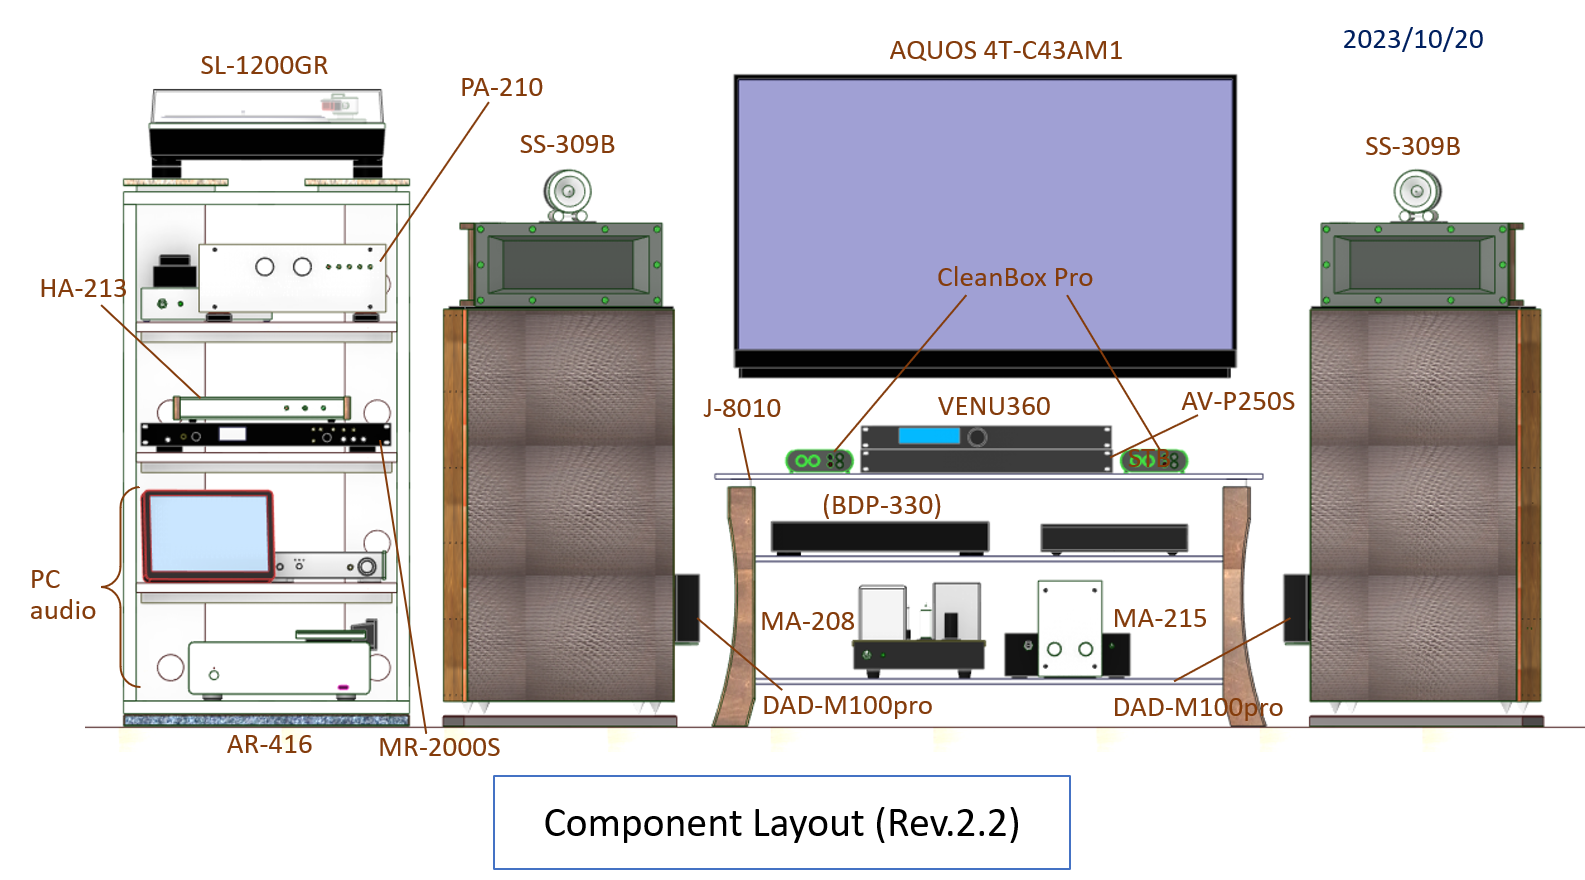 Component layout of Gaudi Rev.2.2